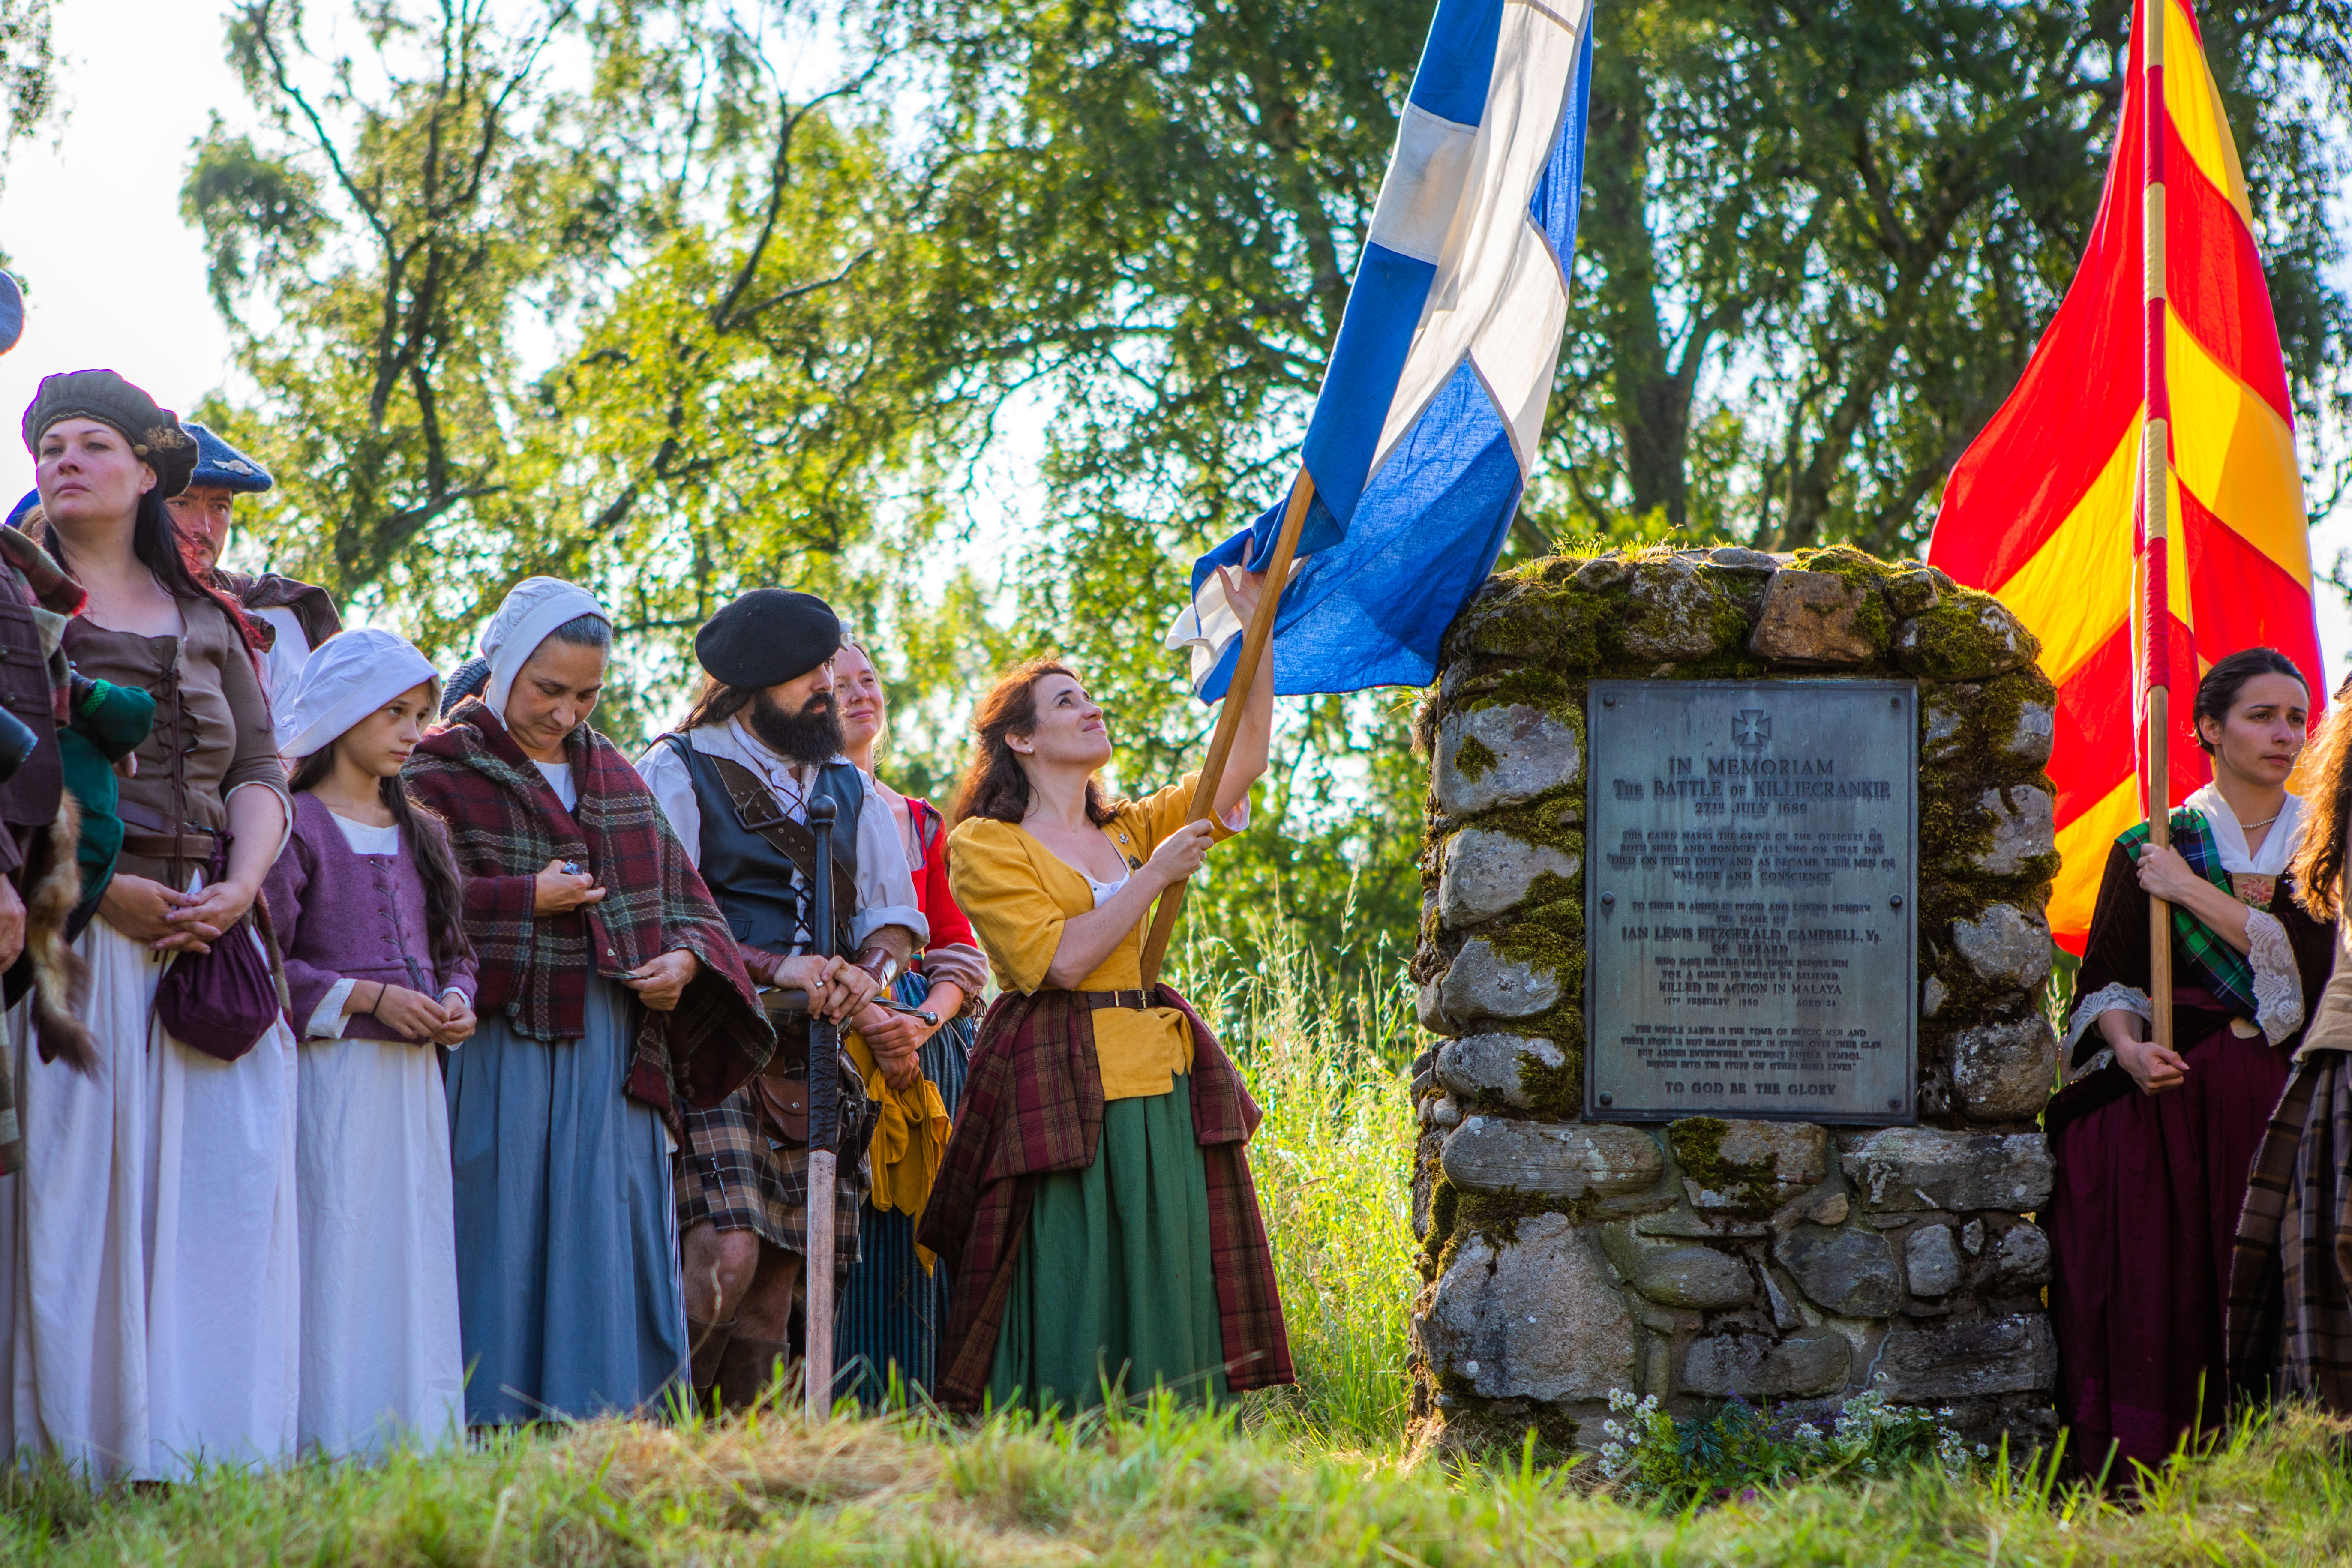 A ceremony at the battlefield memorial cairn commemorating the 330th anniversary of the Battle of Killiecrankie.